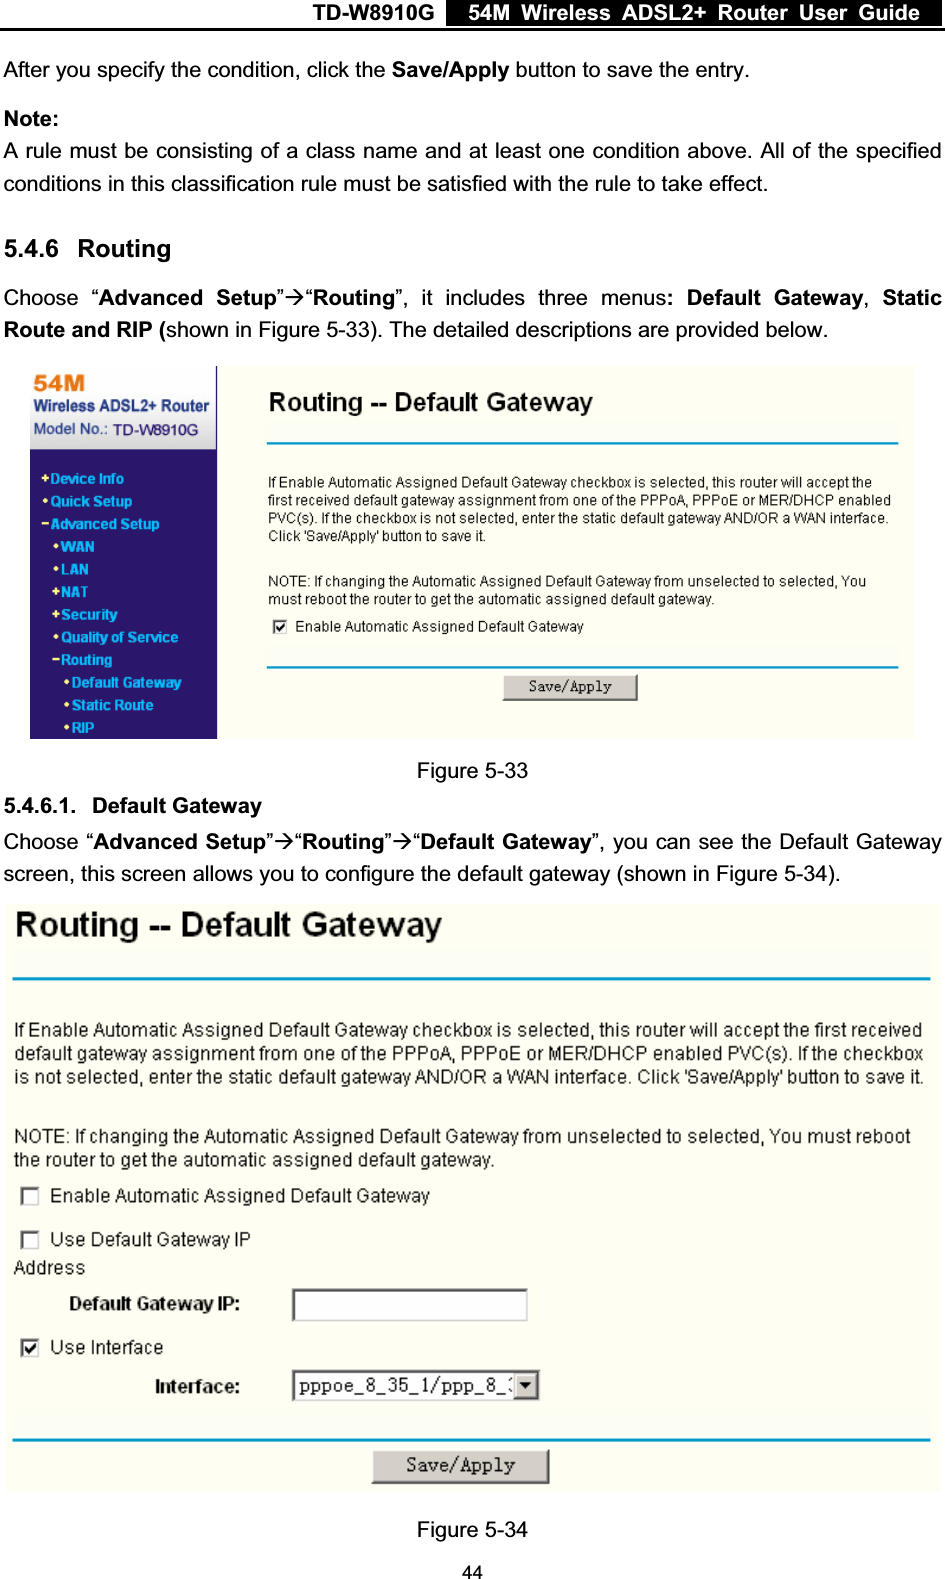 TD-W8910G    54M Wireless ADSL2+ Router User Guide  After you specify the condition, click the Save/Apply button to save the entry. Note:A rule must be consisting of a class name and at least one condition above. All of the specified conditions in this classification rule must be satisfied with the rule to take effect. 5.4.6 RoutingChoose “Advanced Setup”Æ“Routing”, it includes three menus: Default Gateway,Static Route and RIP (shown in Figure 5-33). The detailed descriptions are provided below. Figure 5-33 5.4.6.1. Default Gateway Choose “Advanced Setup”Æ“Routing”Æ“Default Gateway”, you can see the Default Gateway screen, this screen allows you to configure the default gateway (shown in Figure 5-34).Figure 5-34  44